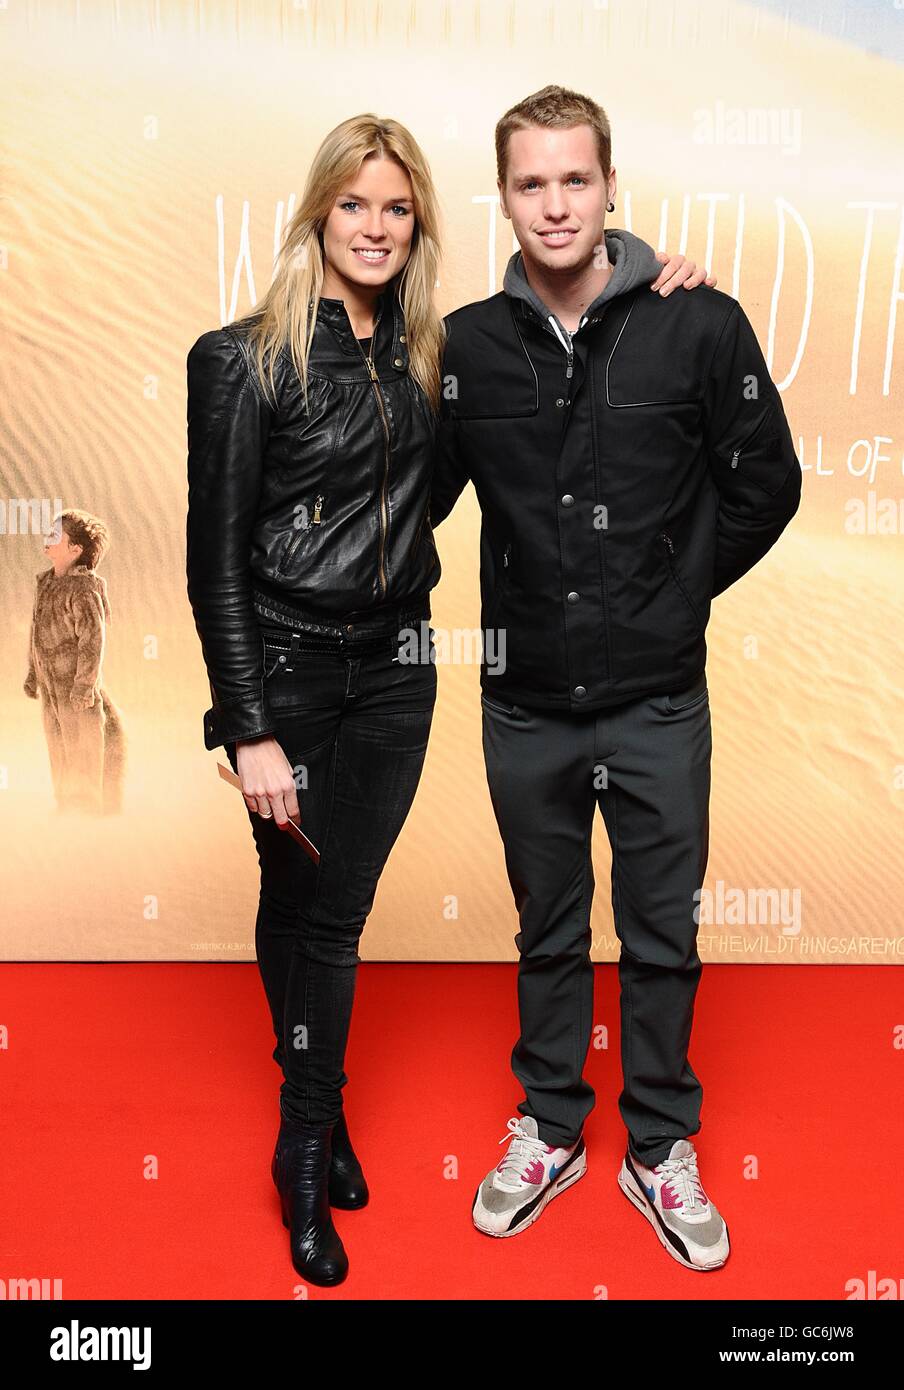 Isabella Calthorpe and Sam Branson arriving for the UK premiere of Where The Wild Things Are at the Vue West End, Leicester Square, London. Stock Photo